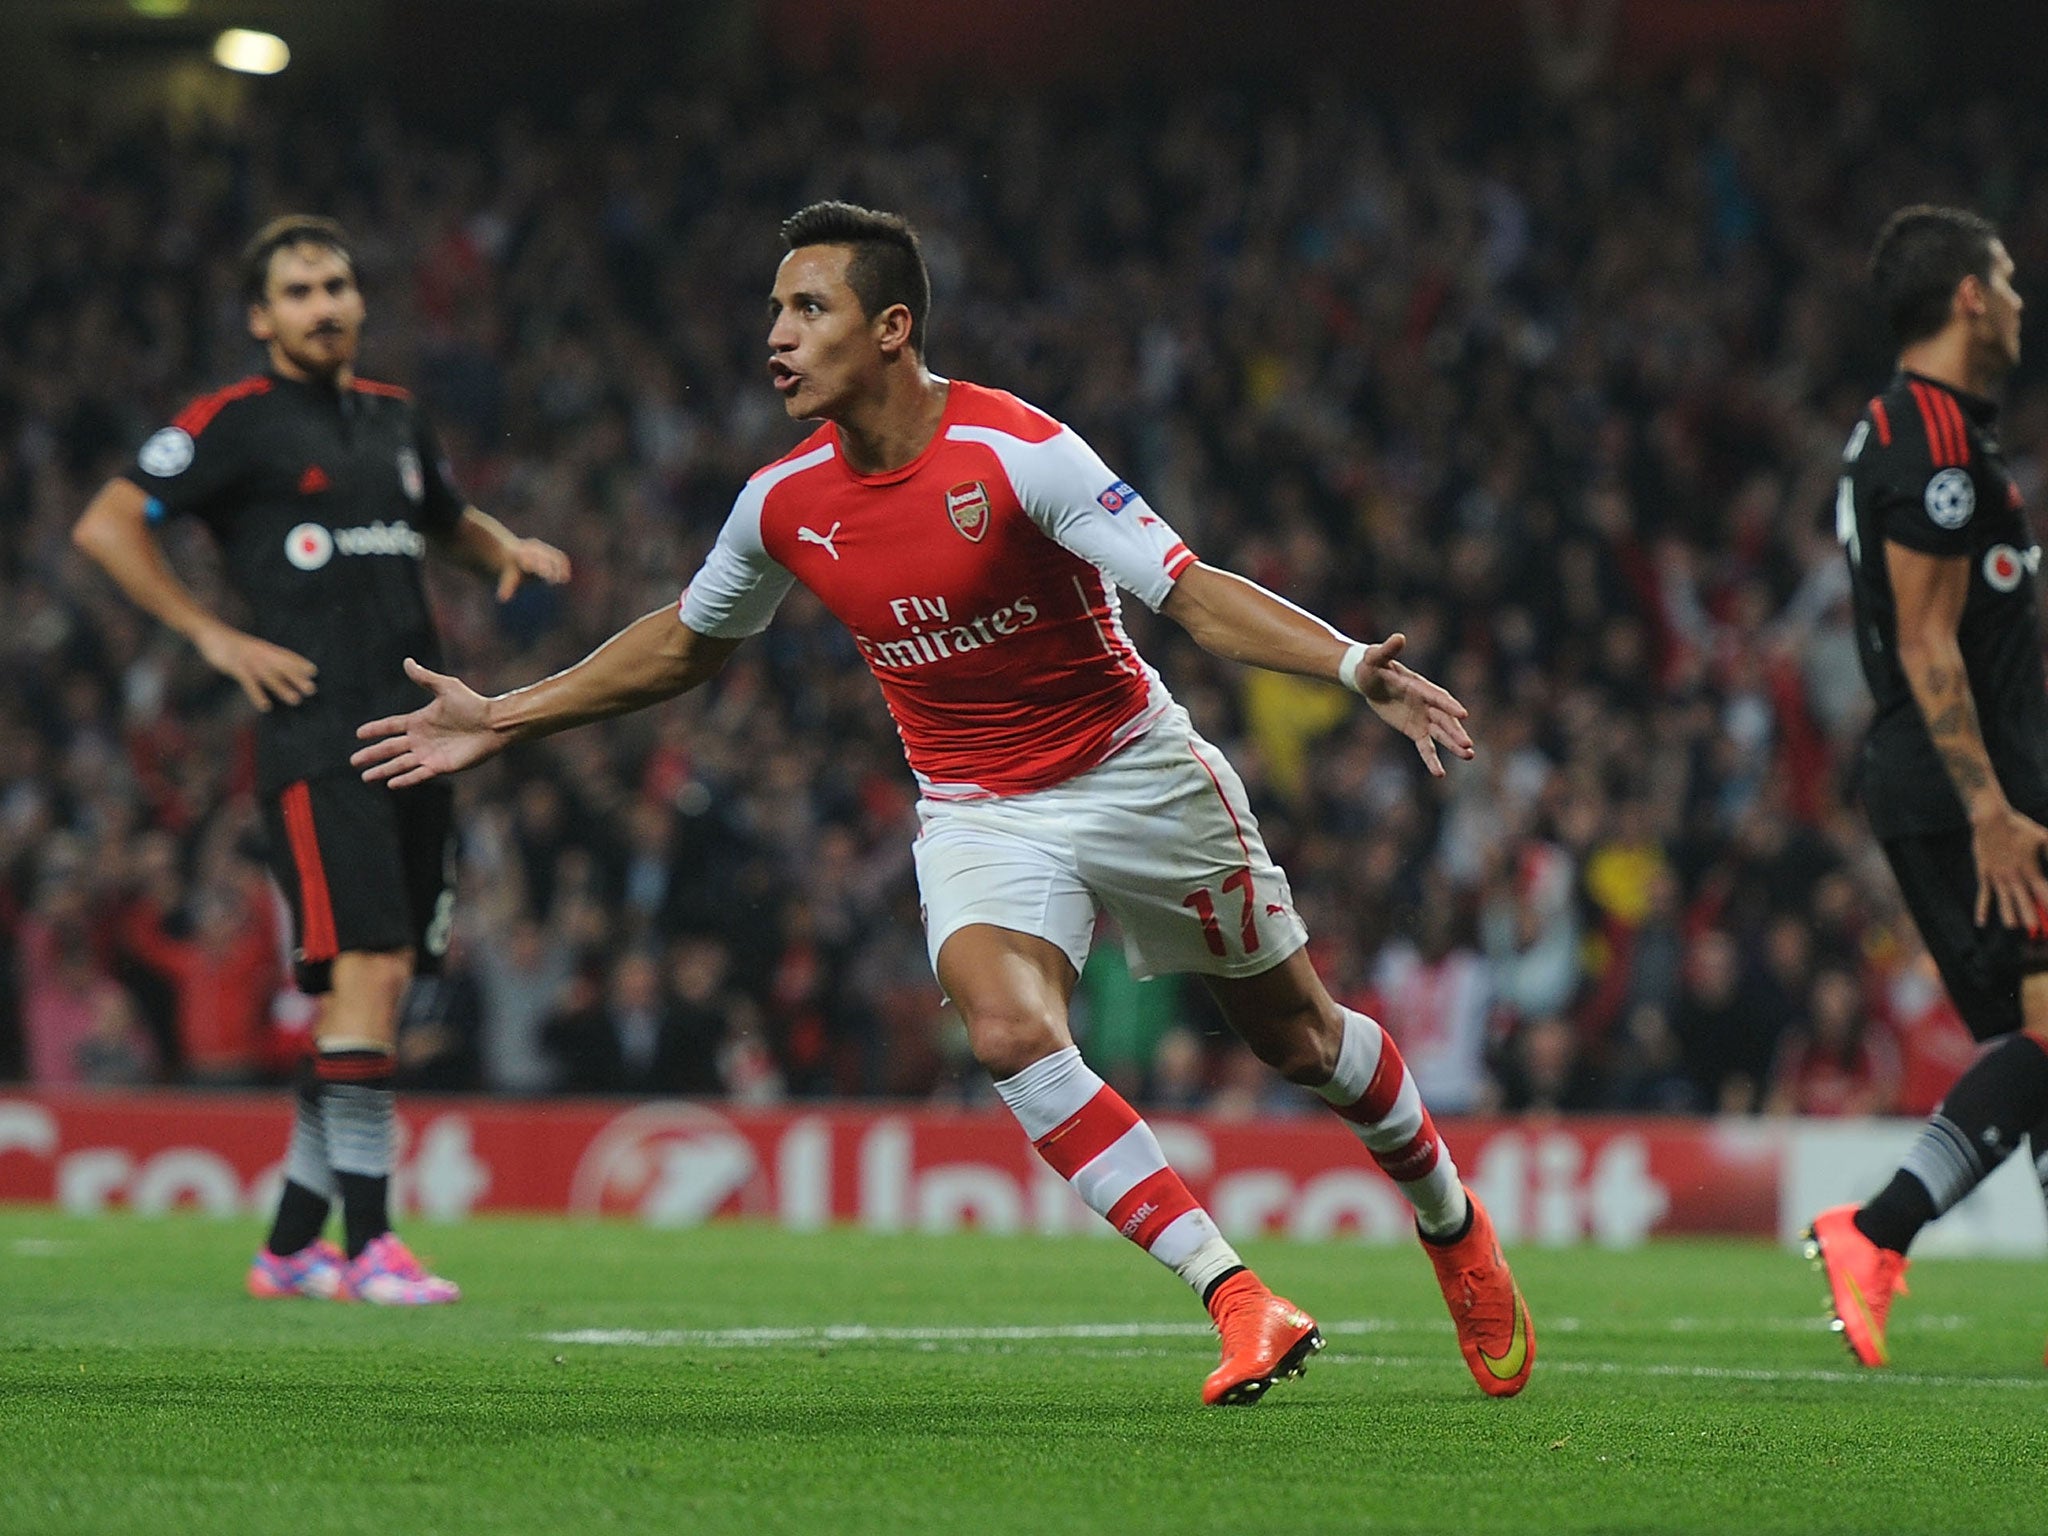 Alexis Sanchez celebrates after scoring his first goal for Arsenal in the Champions League qualifier against Besiktas